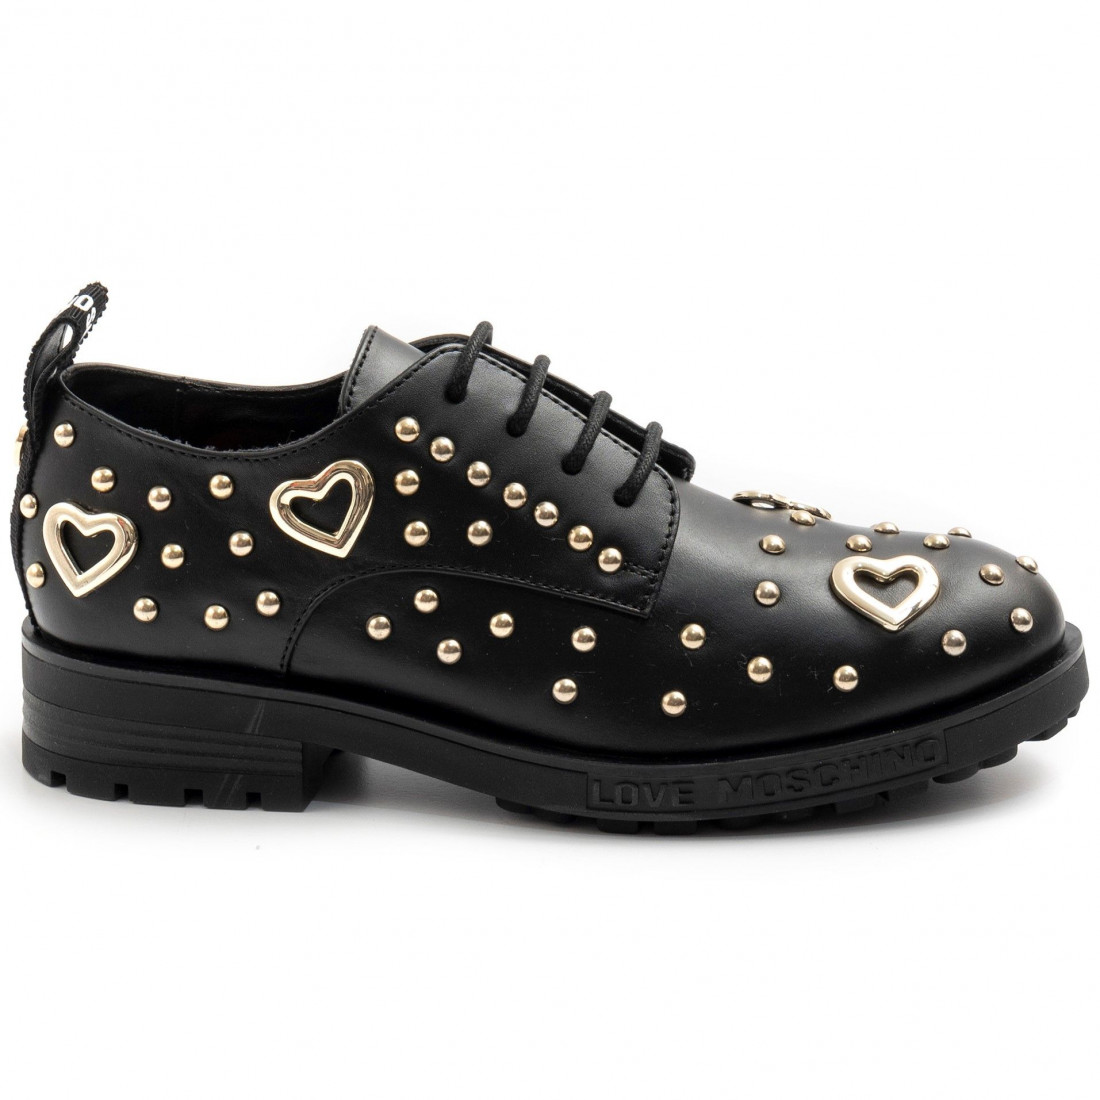 Love Moschino blak lace up shoes with studs